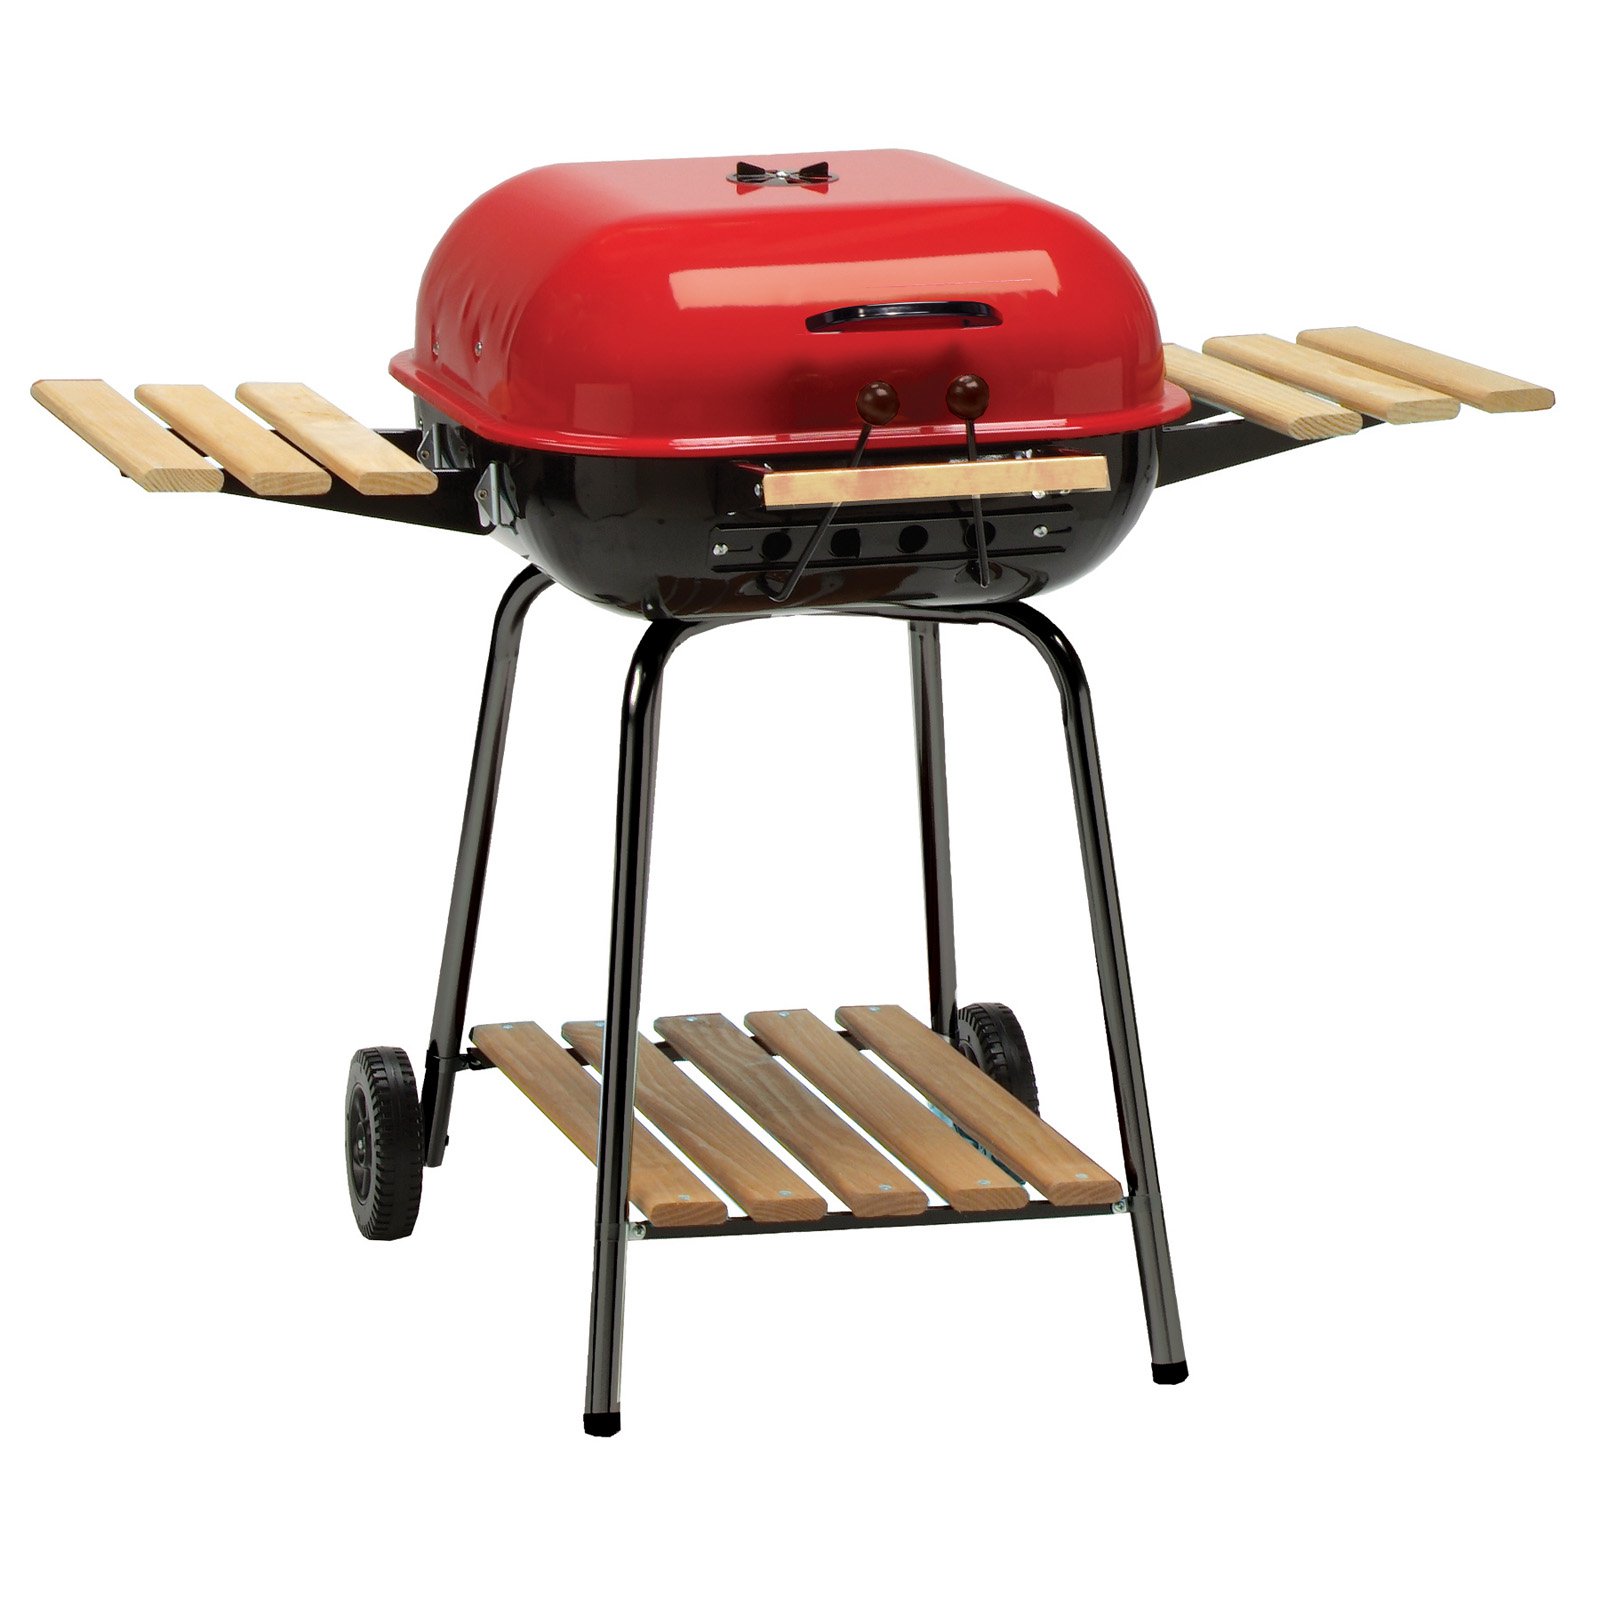 Americana Swinger 6 Position Charcoal Grill - image 3 of 8